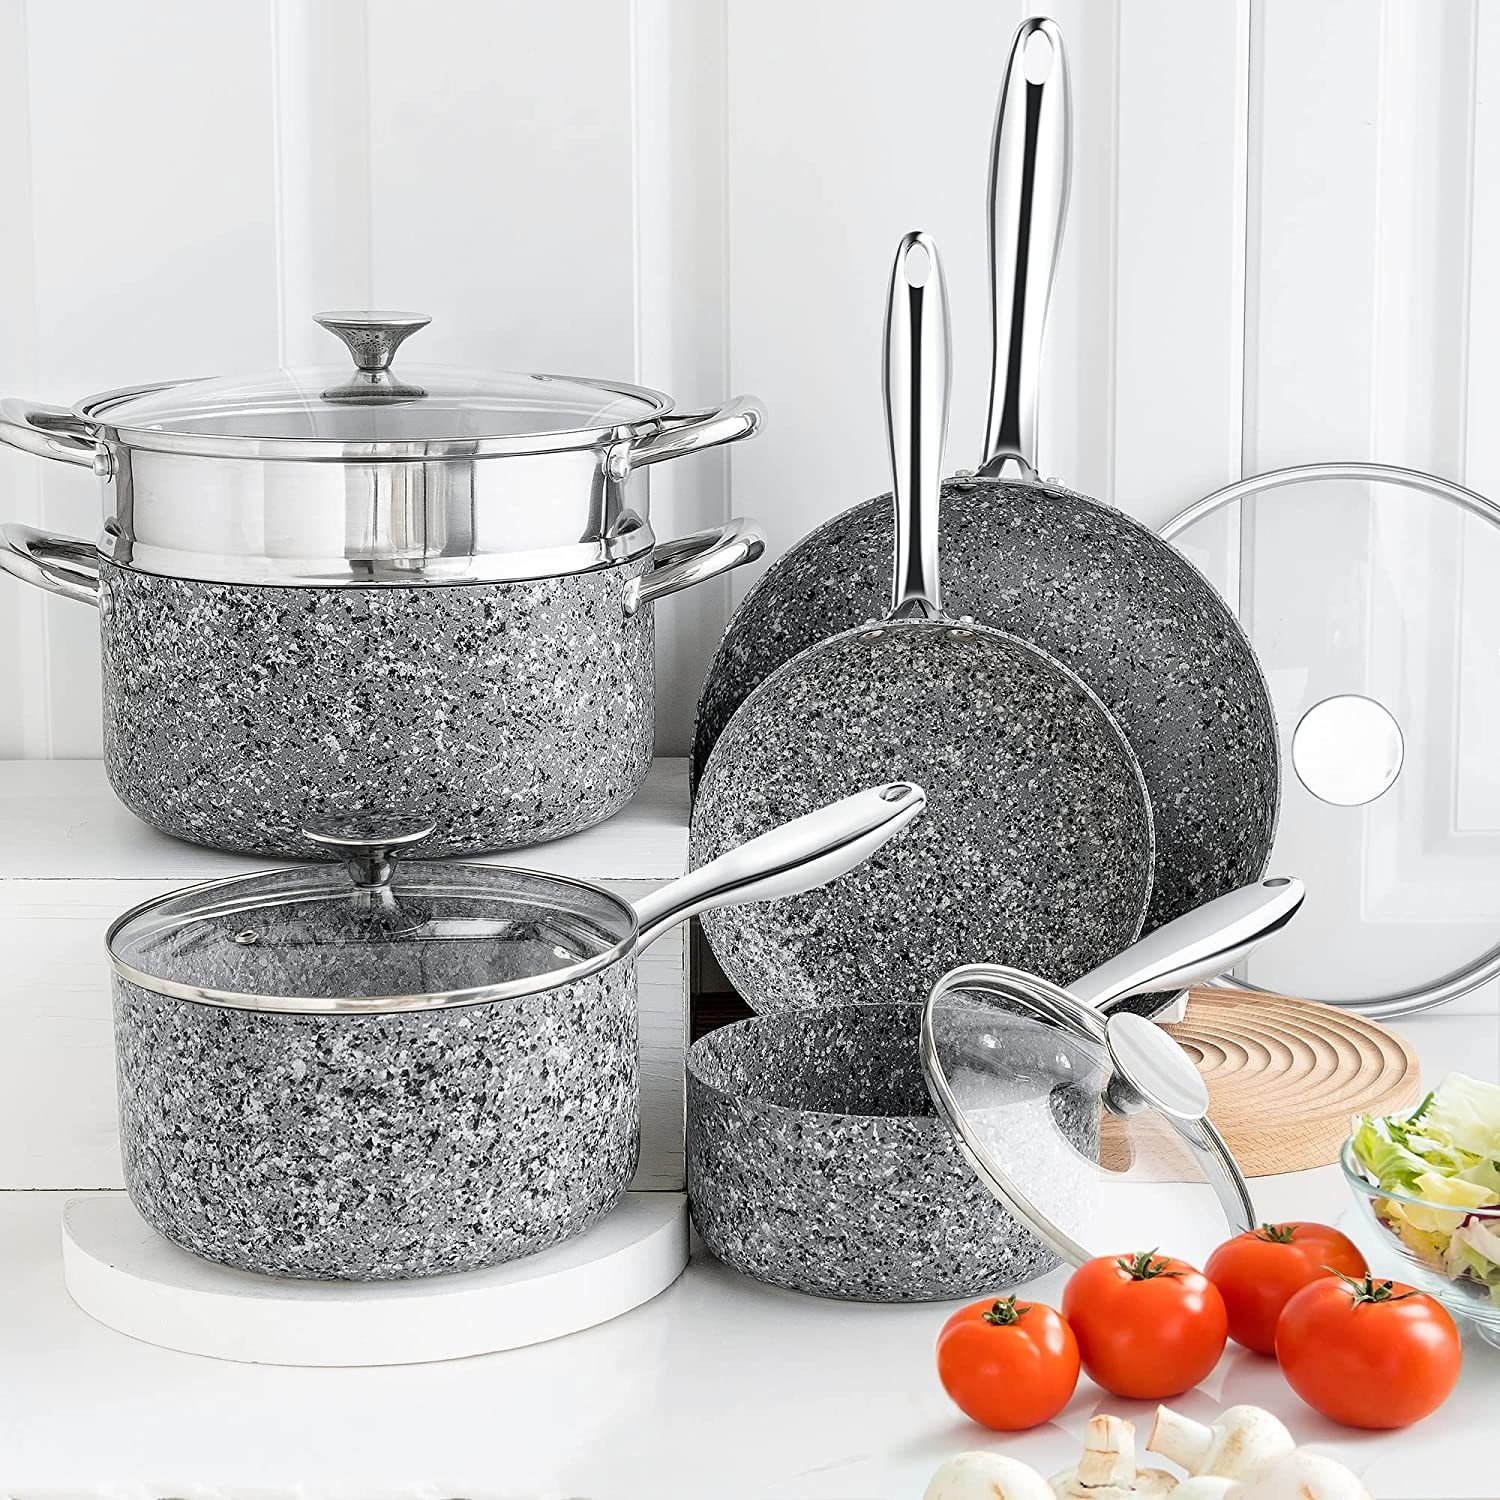 https://ak1.ostkcdn.com/images/products/is/images/direct/64b4a4d405a77f7eb974c45c4d671cbc8edbf1dd/Pots-and-Pans-Set-22-Piece%2C-Nonstick-Kitchen-Cookware-Sets-with-Stone-Derived-Coating.jpg